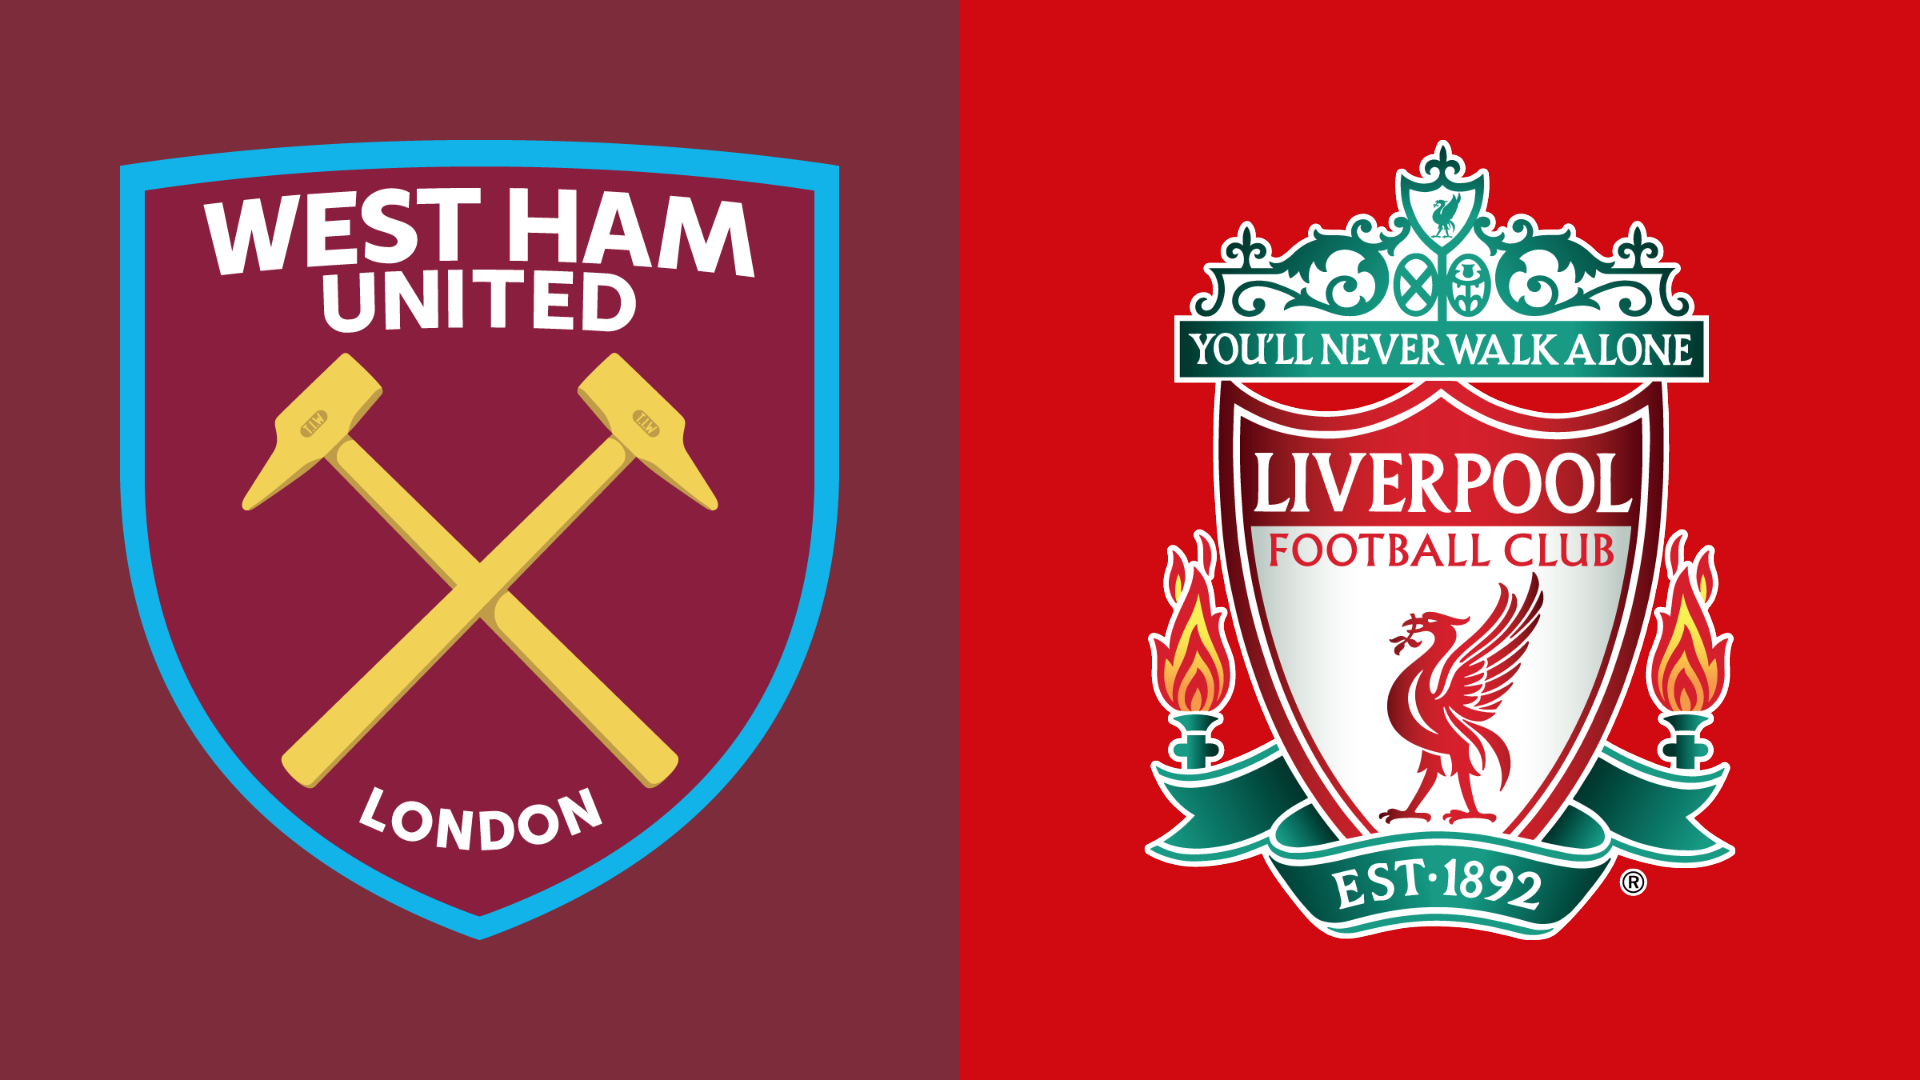 West Ham United v Liverpool preview: Team news, head-to-head and stats